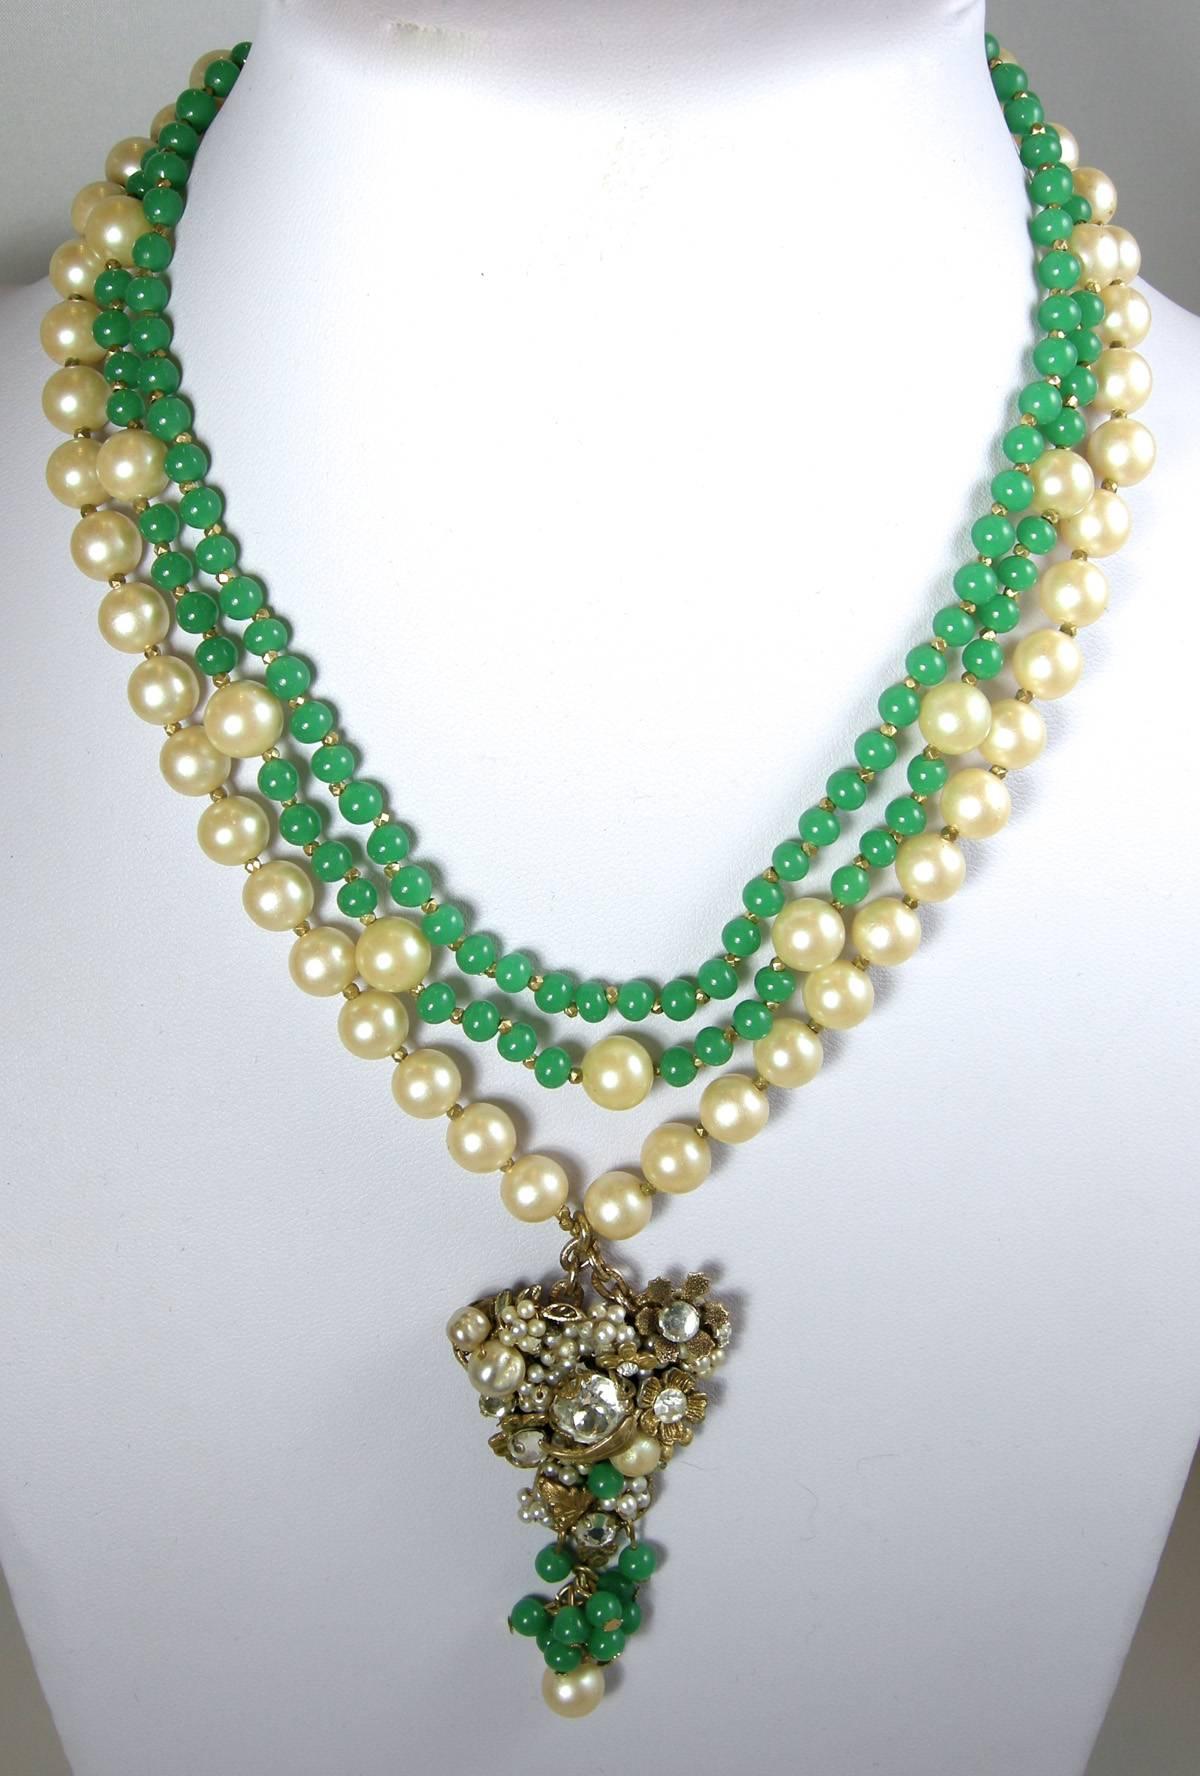 vintage green glass bead necklace